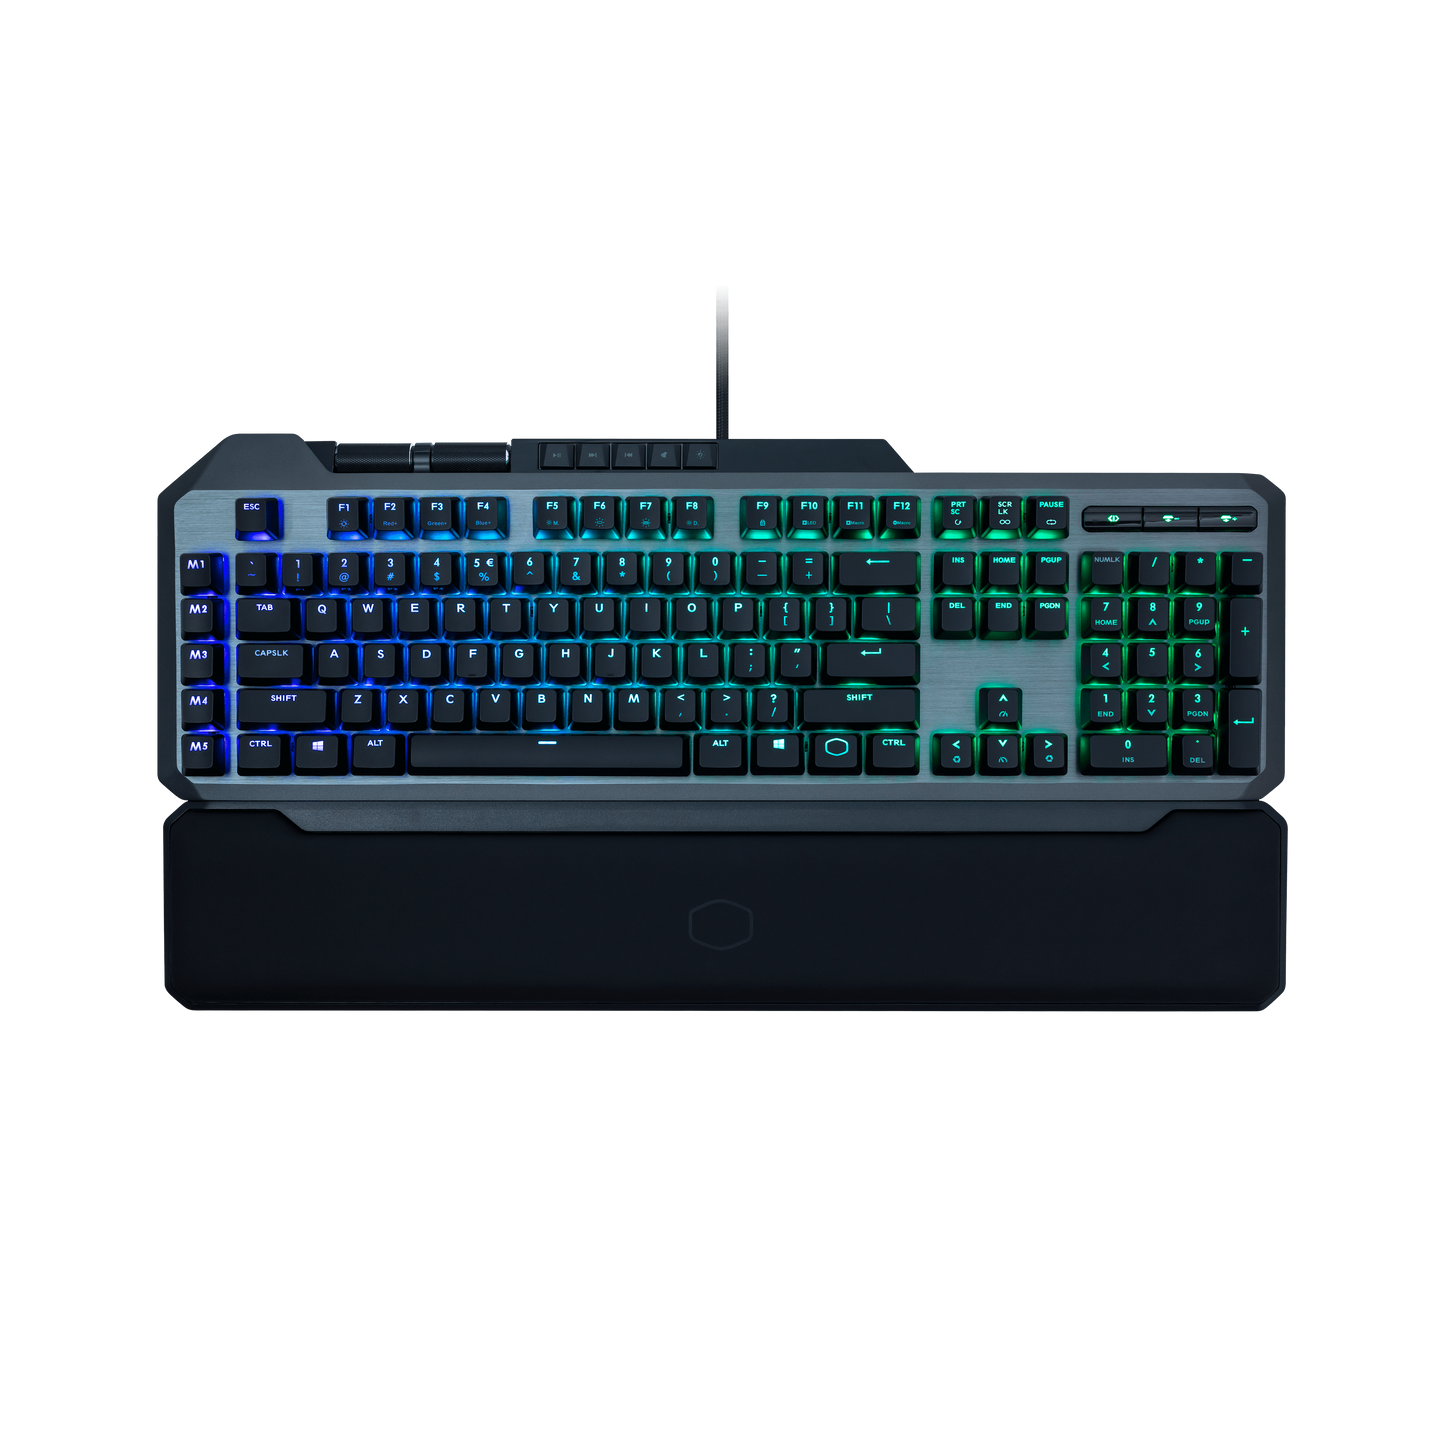 Cooler Master MK850 - Mechanical Gaming Keyboard with Aimpad technology - Cherry MX Red - UK QWERTY